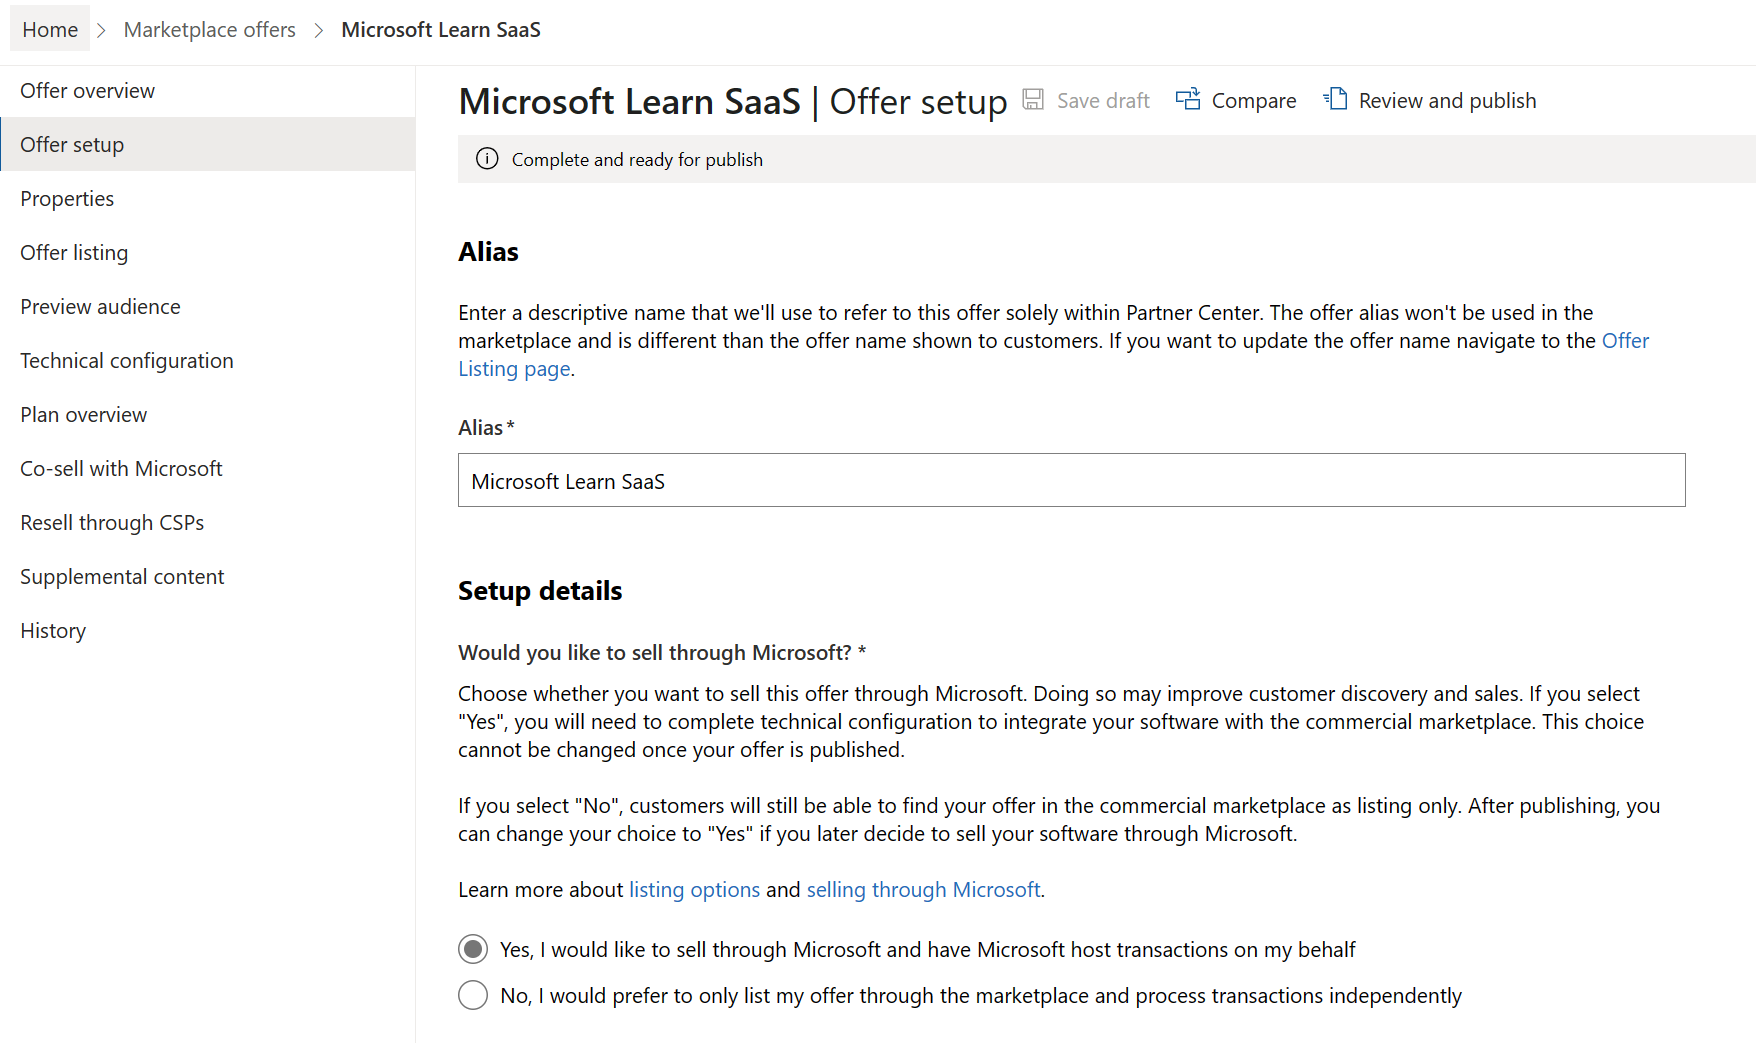 Screenshot of the 'sell through Microsoft' question from the offer setup page in Partner Center.